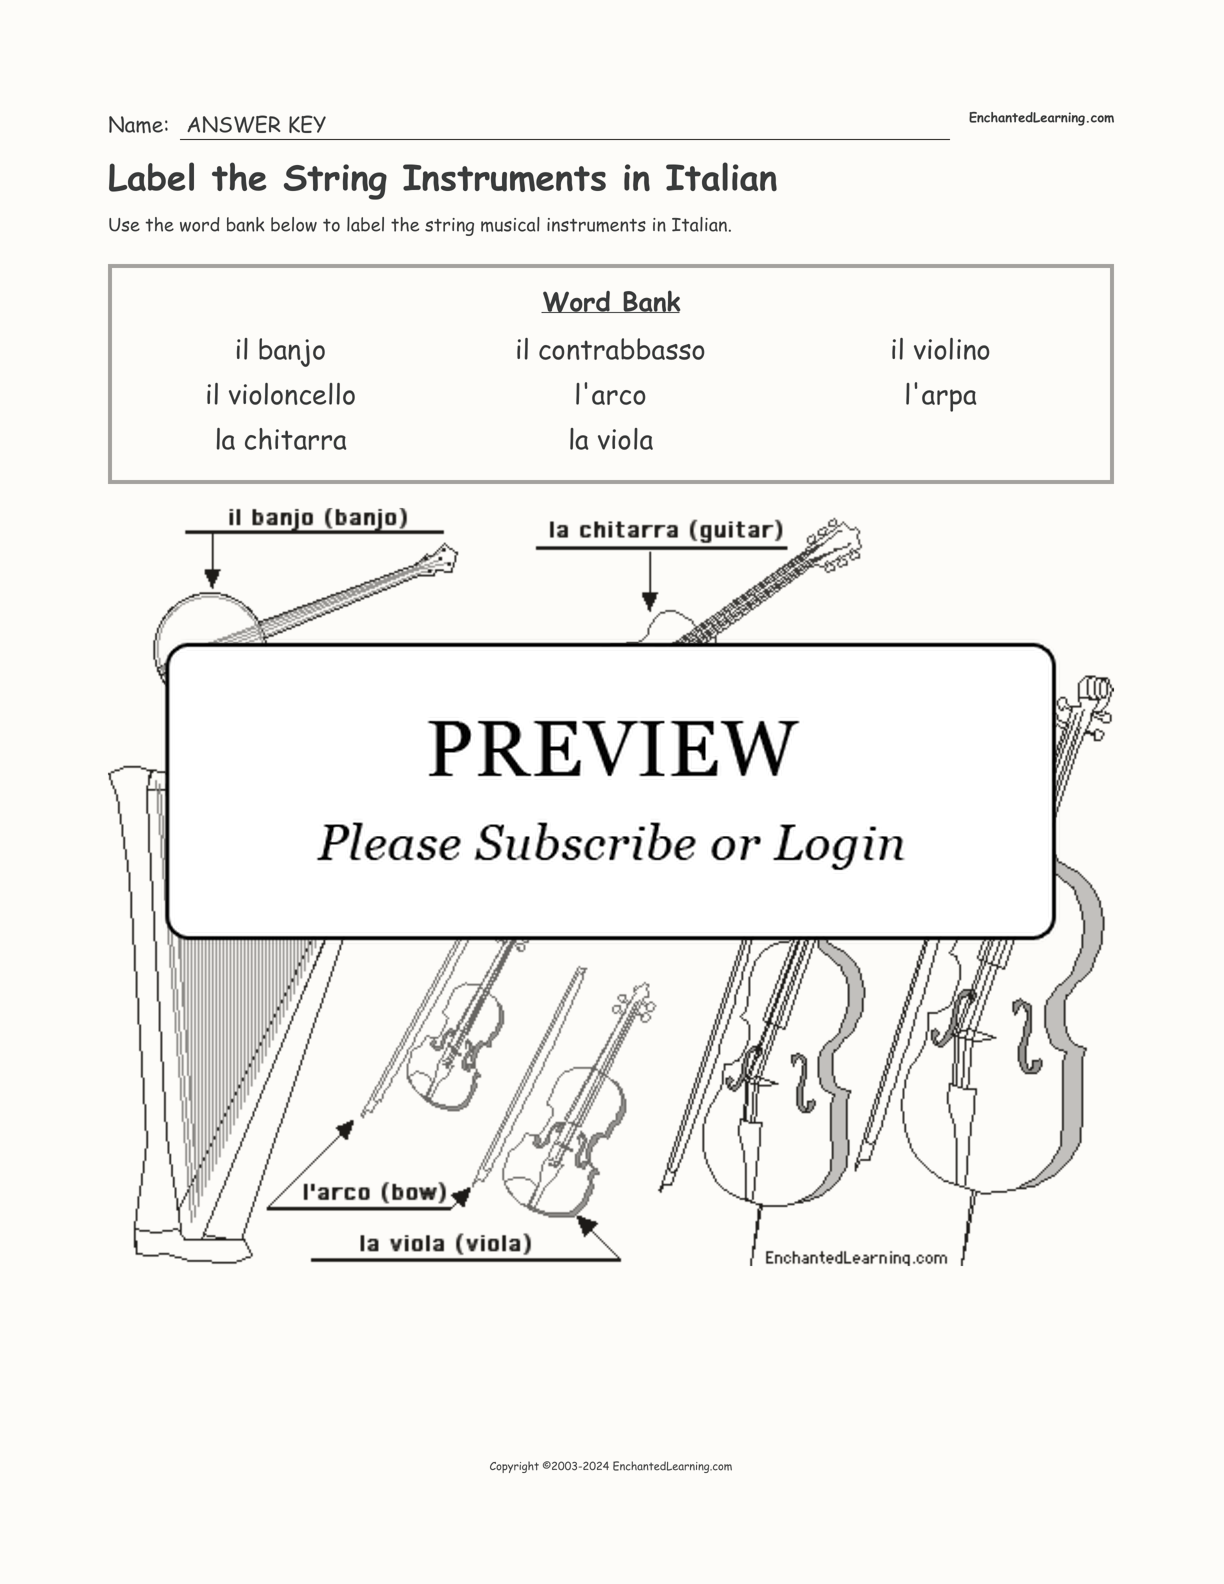 Label the String Instruments in Italian interactive worksheet page 2